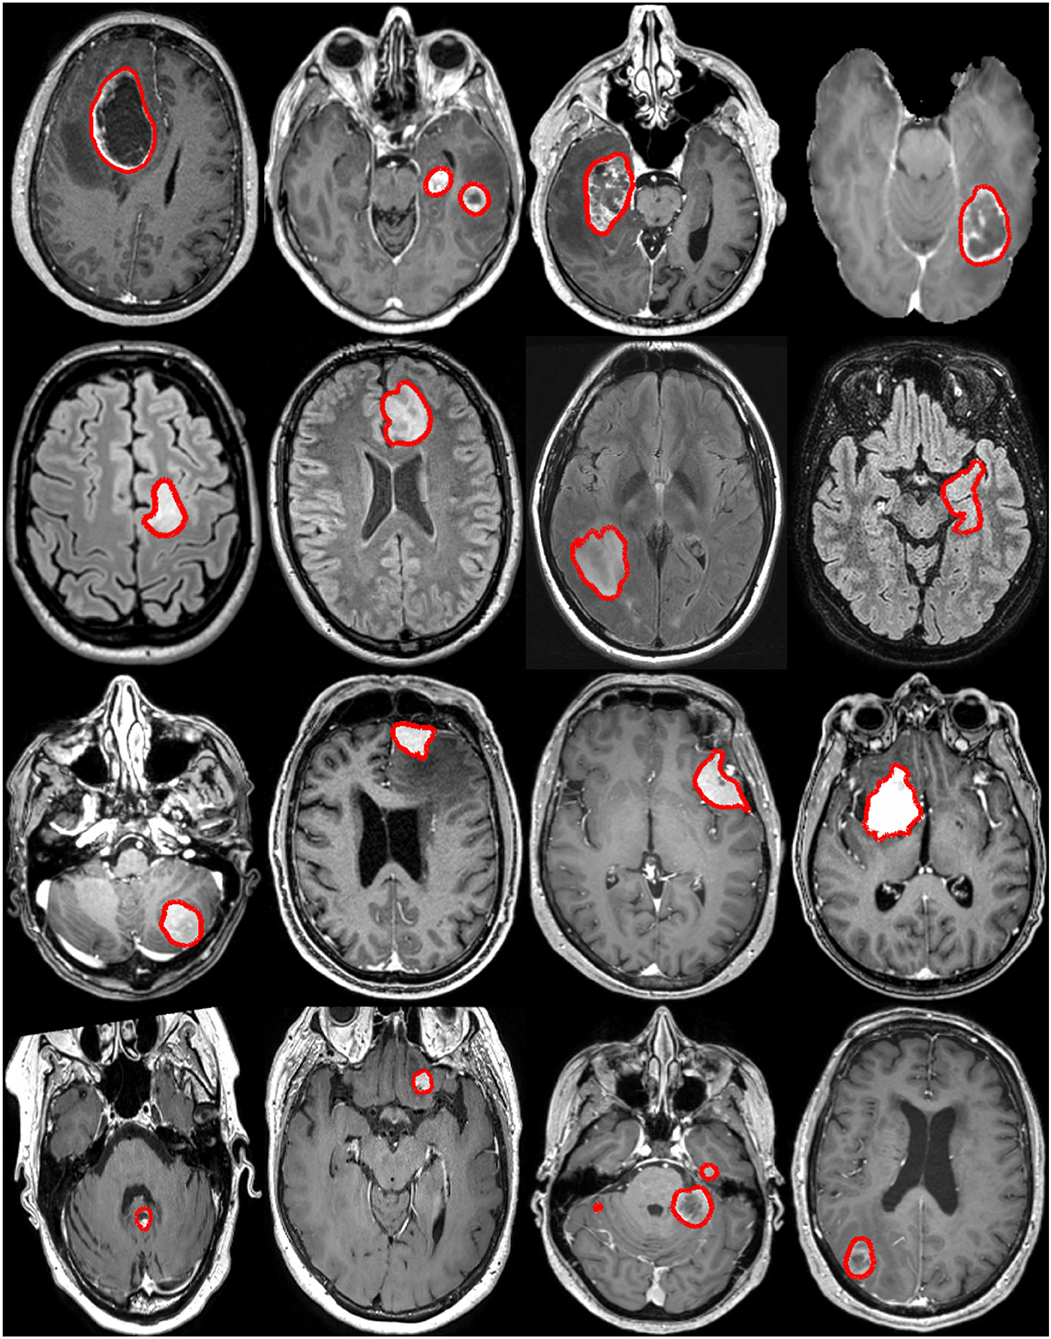 frontiers-preoperative-brain-tumor-imaging-models-and-software-for